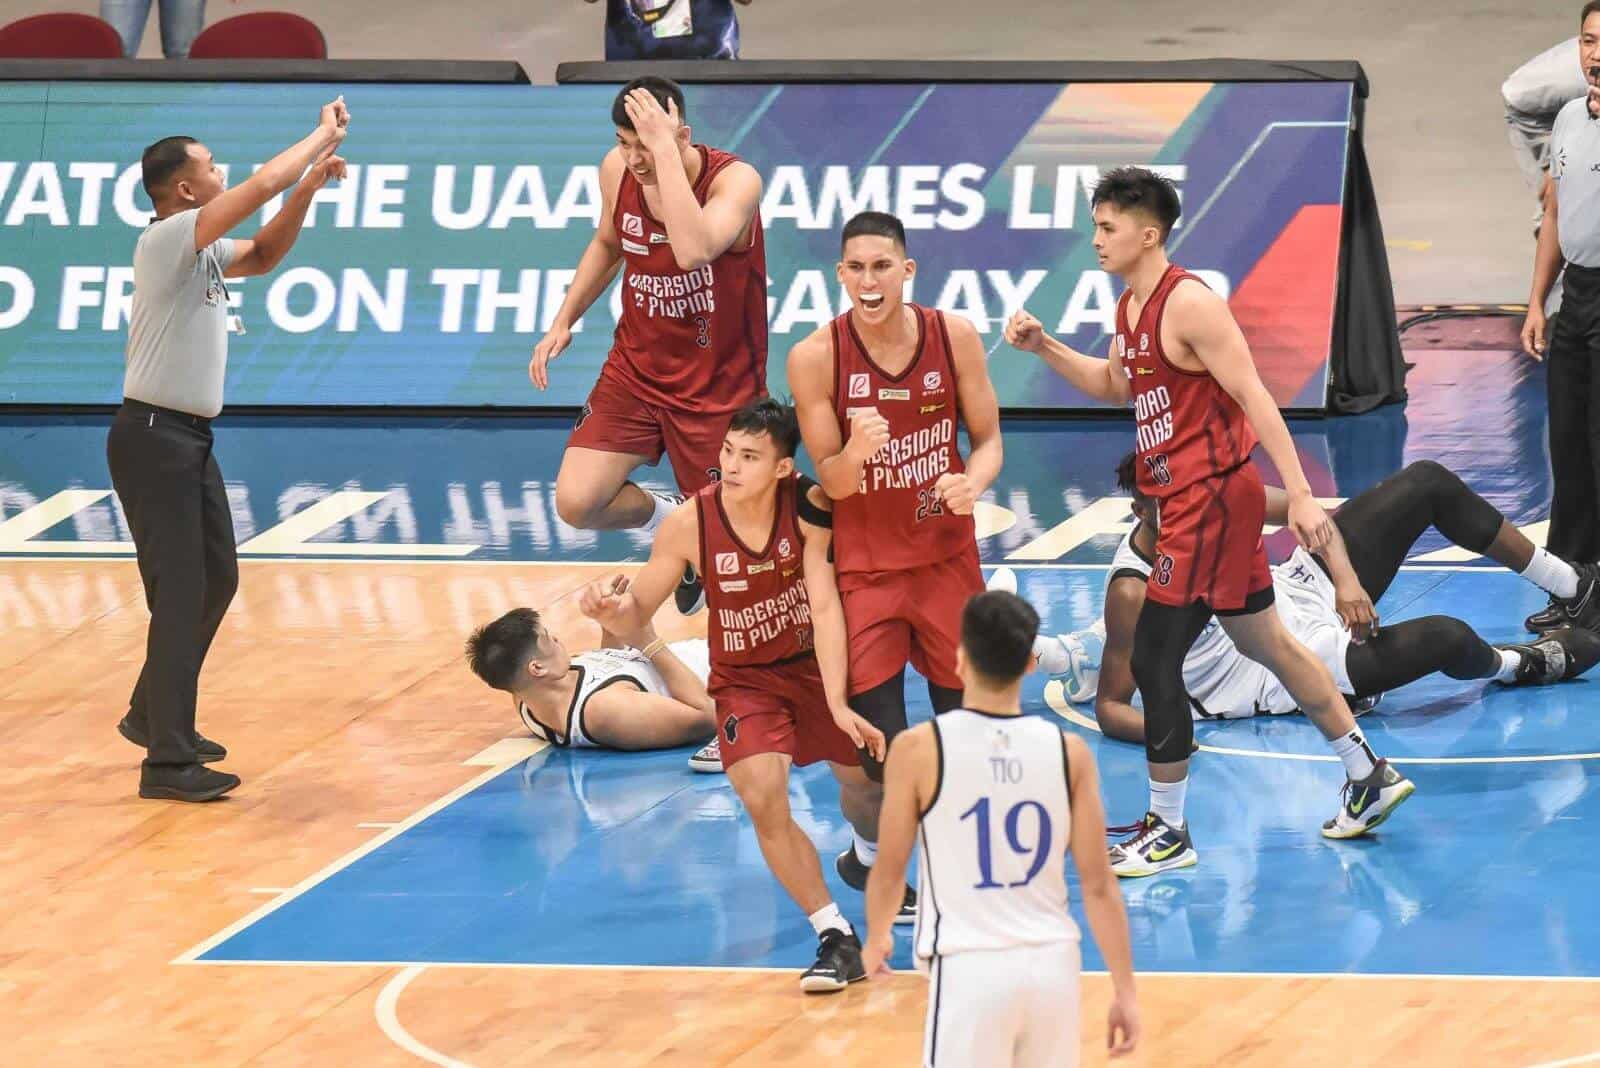 The UP Fighting Maroons celebrate on the court, one win away from the UAAP men's basketball title.